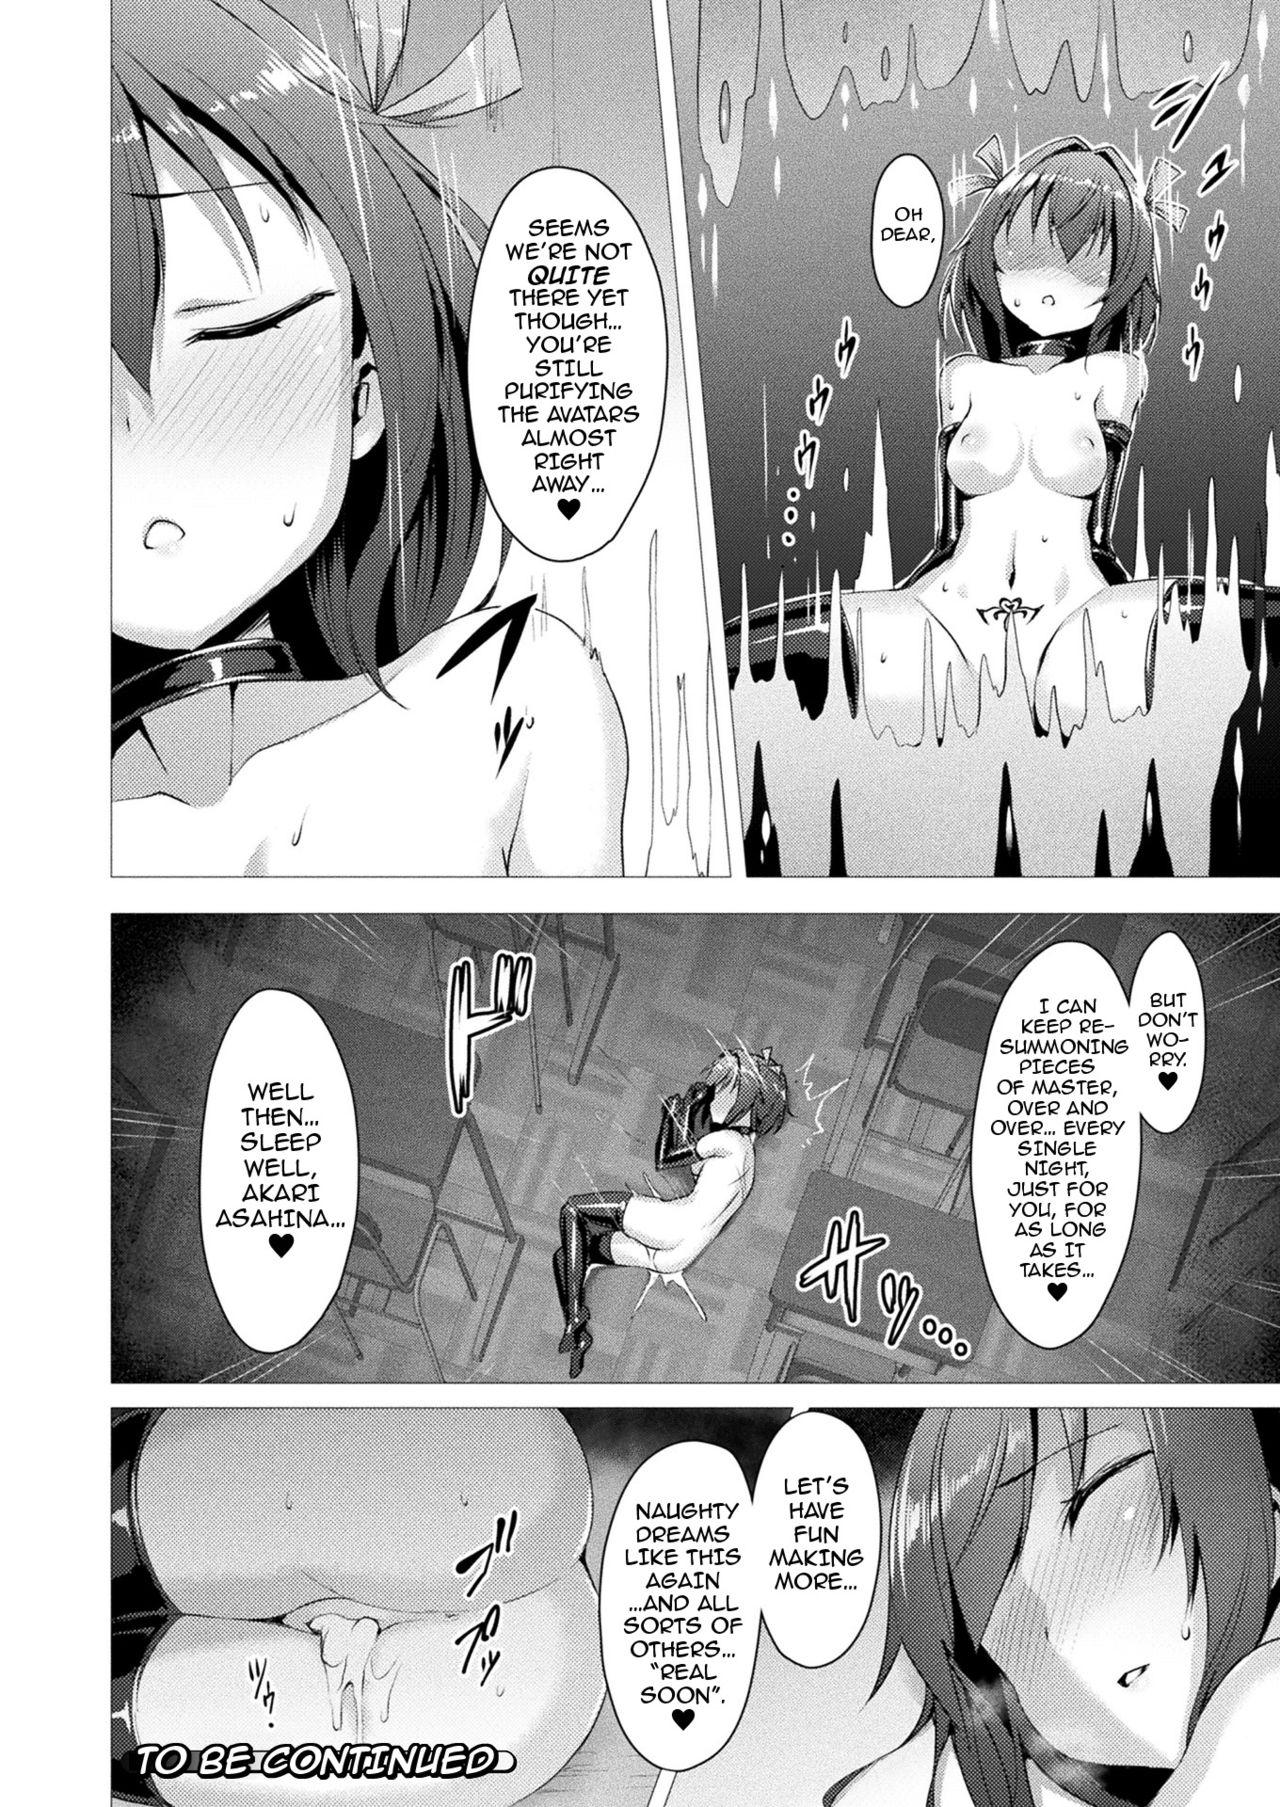 Aisei Tenshi Love Mary | The Archangel of Love, Love Mary Ch. 1-8 part 1 22